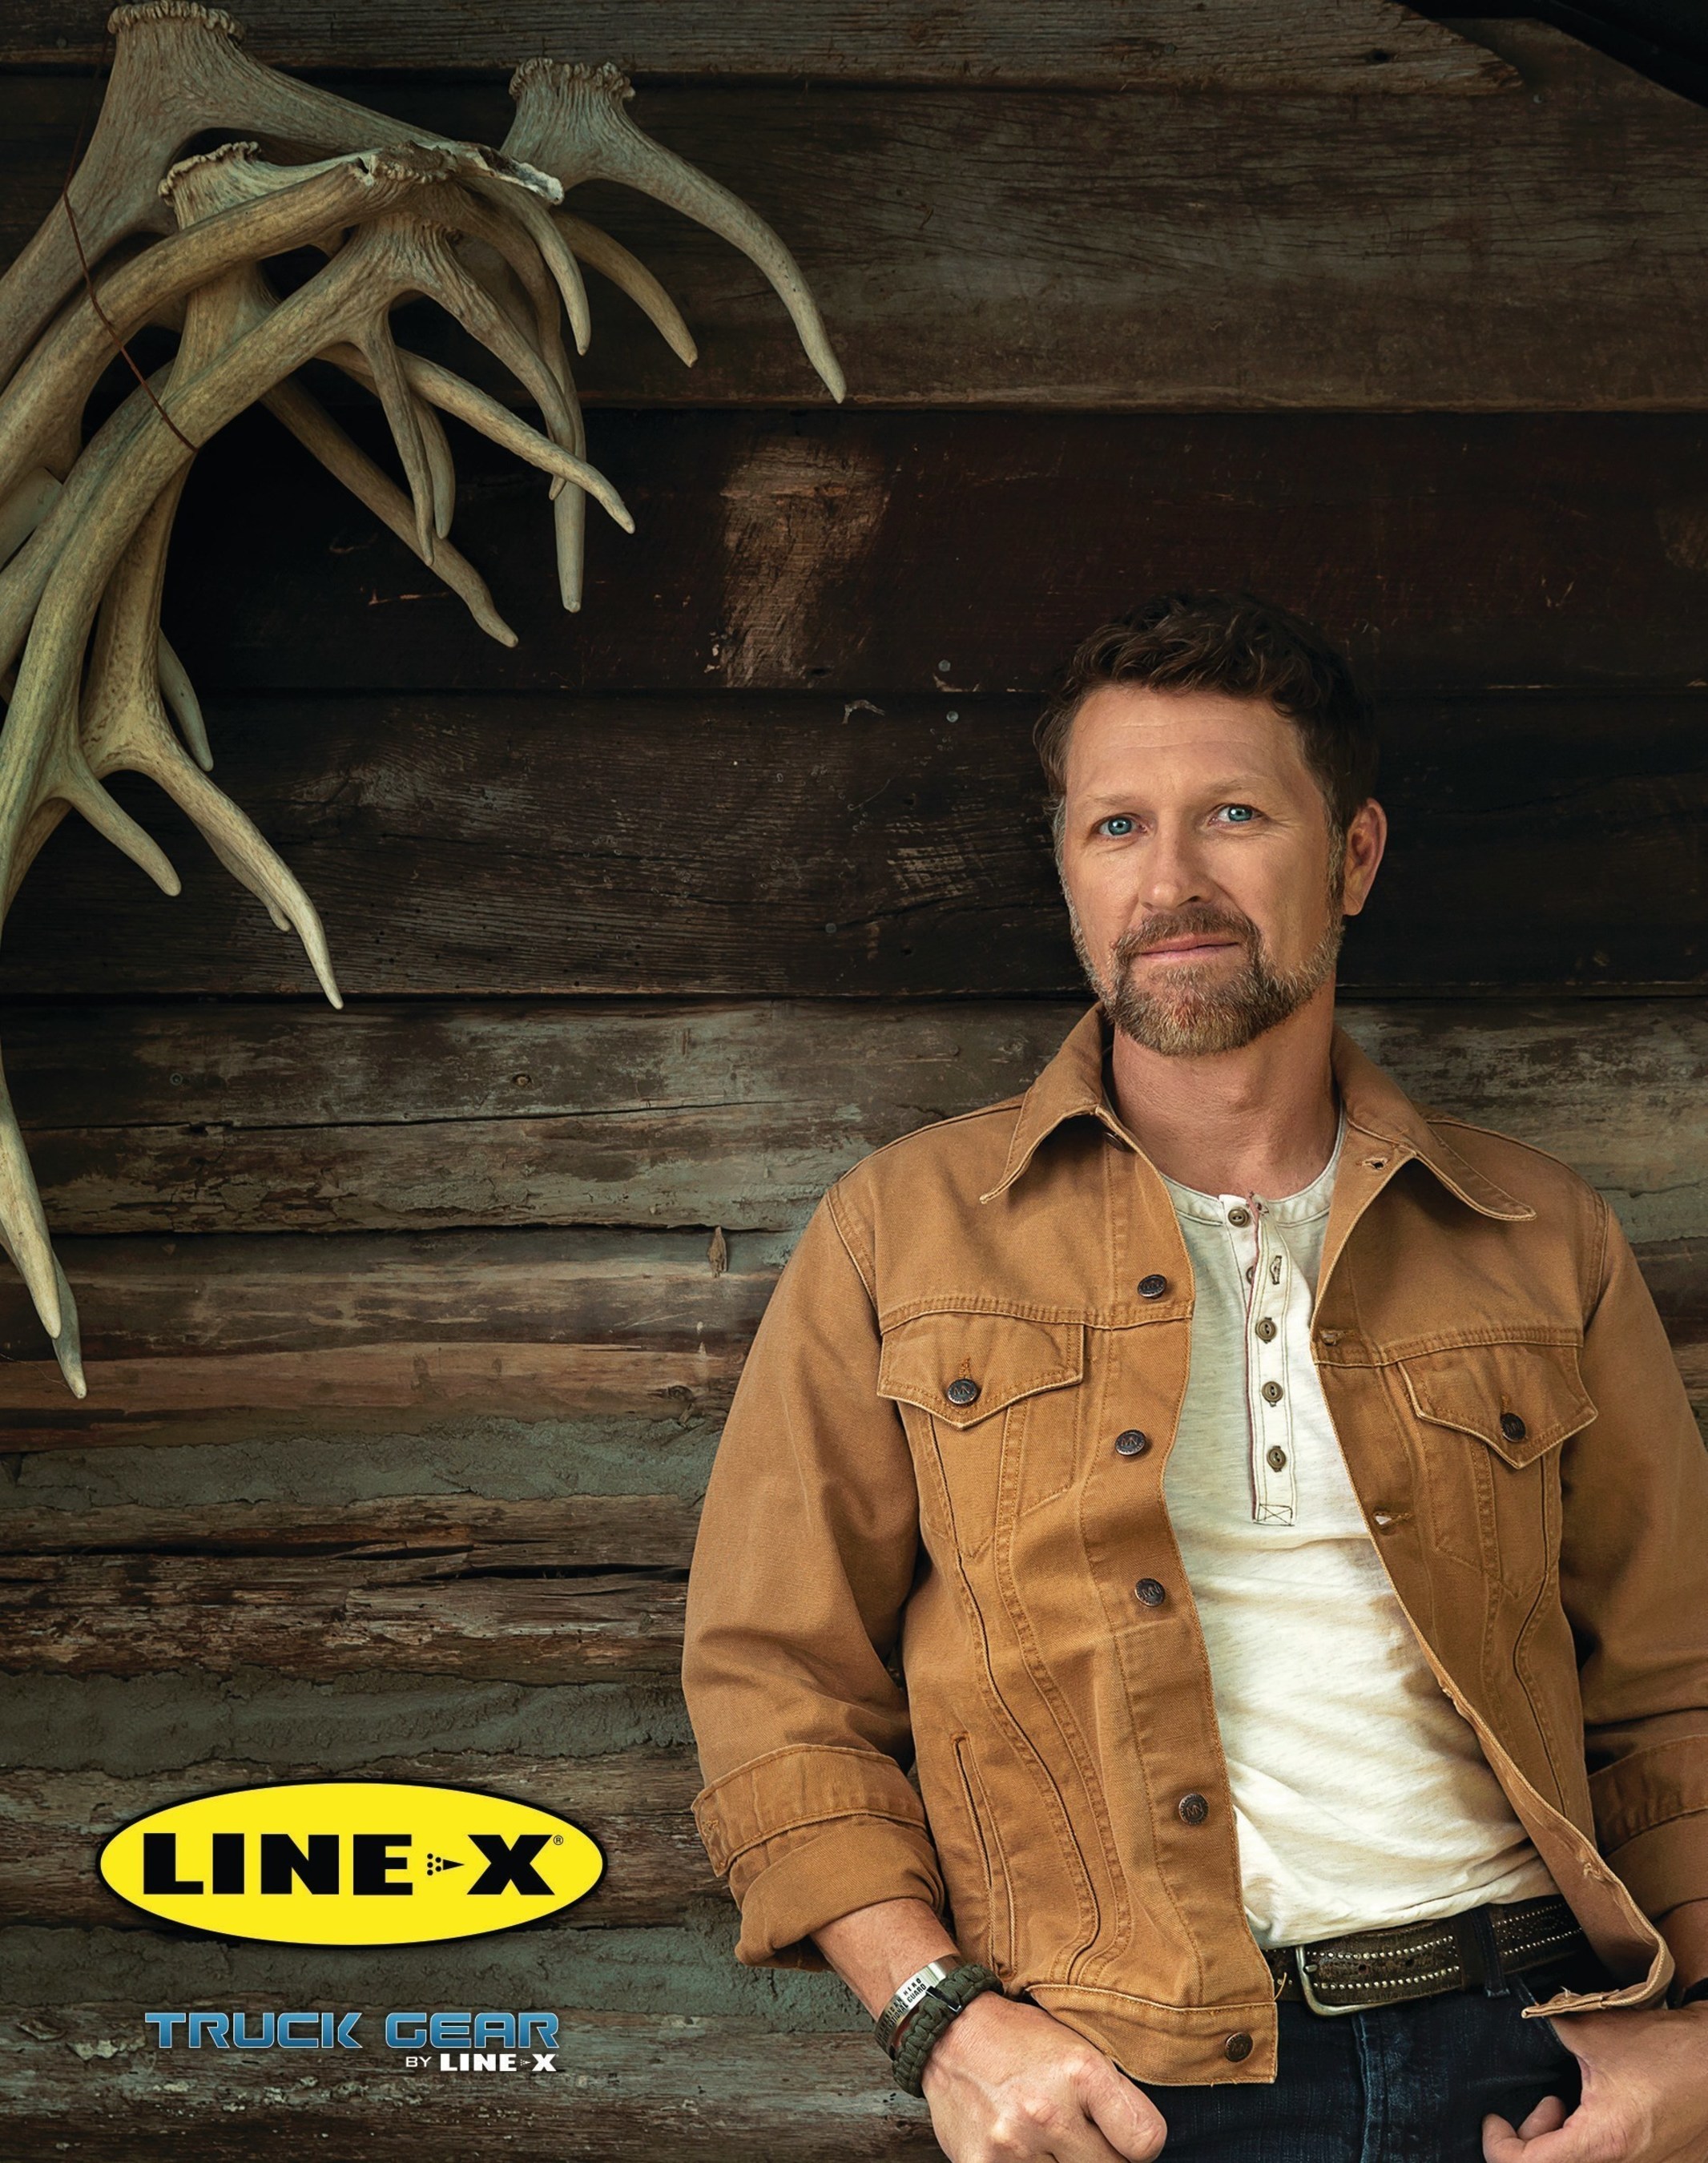 A multi-faceted entertainer, Craig Morgan has made a name for himself as a country music icon, TV host, celebrated outdoorsman and patriotic Army veteran. One of country music's best-loved artists, the Black River Entertainment artist thrills massive crowds with signature hits including "Bonfire," "Almost Home," "Redneck Yacht Club," "International Harvester," "This Ole Boy," "Wake Up Lovin' You" and the six week #1, "That's What I Love About Sunday." The new single "When I'm Gone" is available for digital download now and will lead a new album due in 2016.